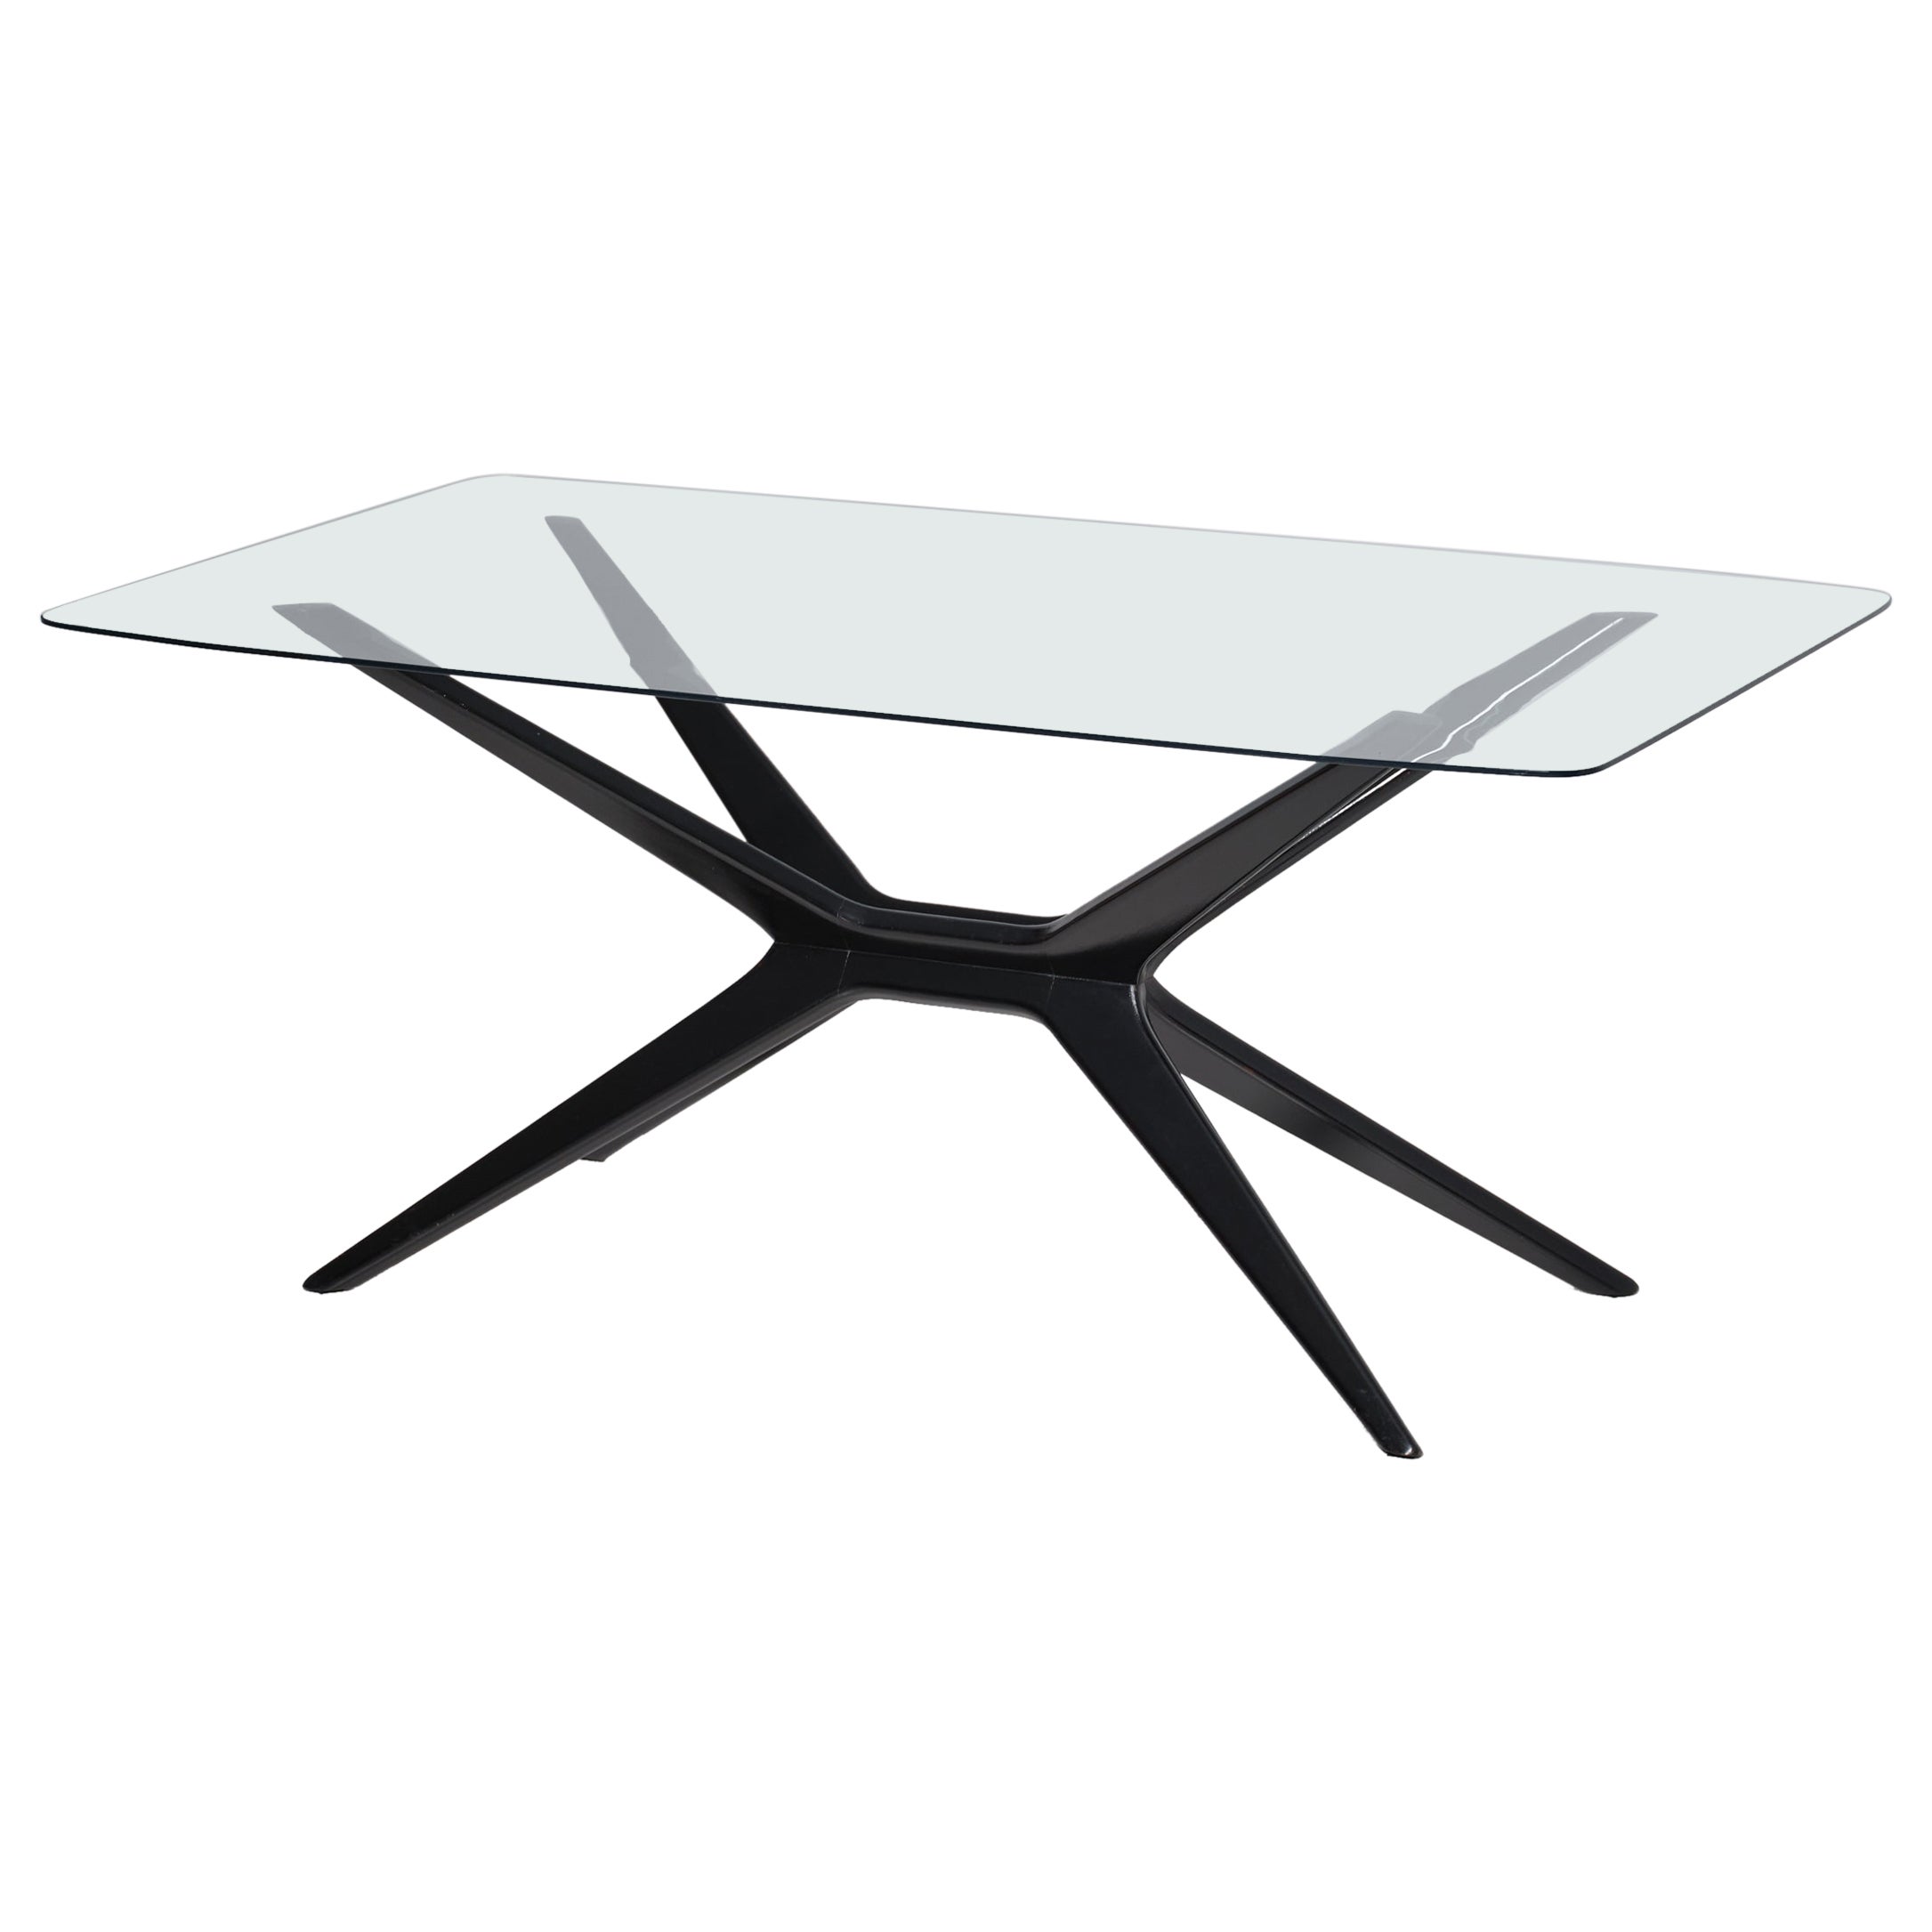 Elegant Coffee Table with Glass Top and Sleek Black Legs